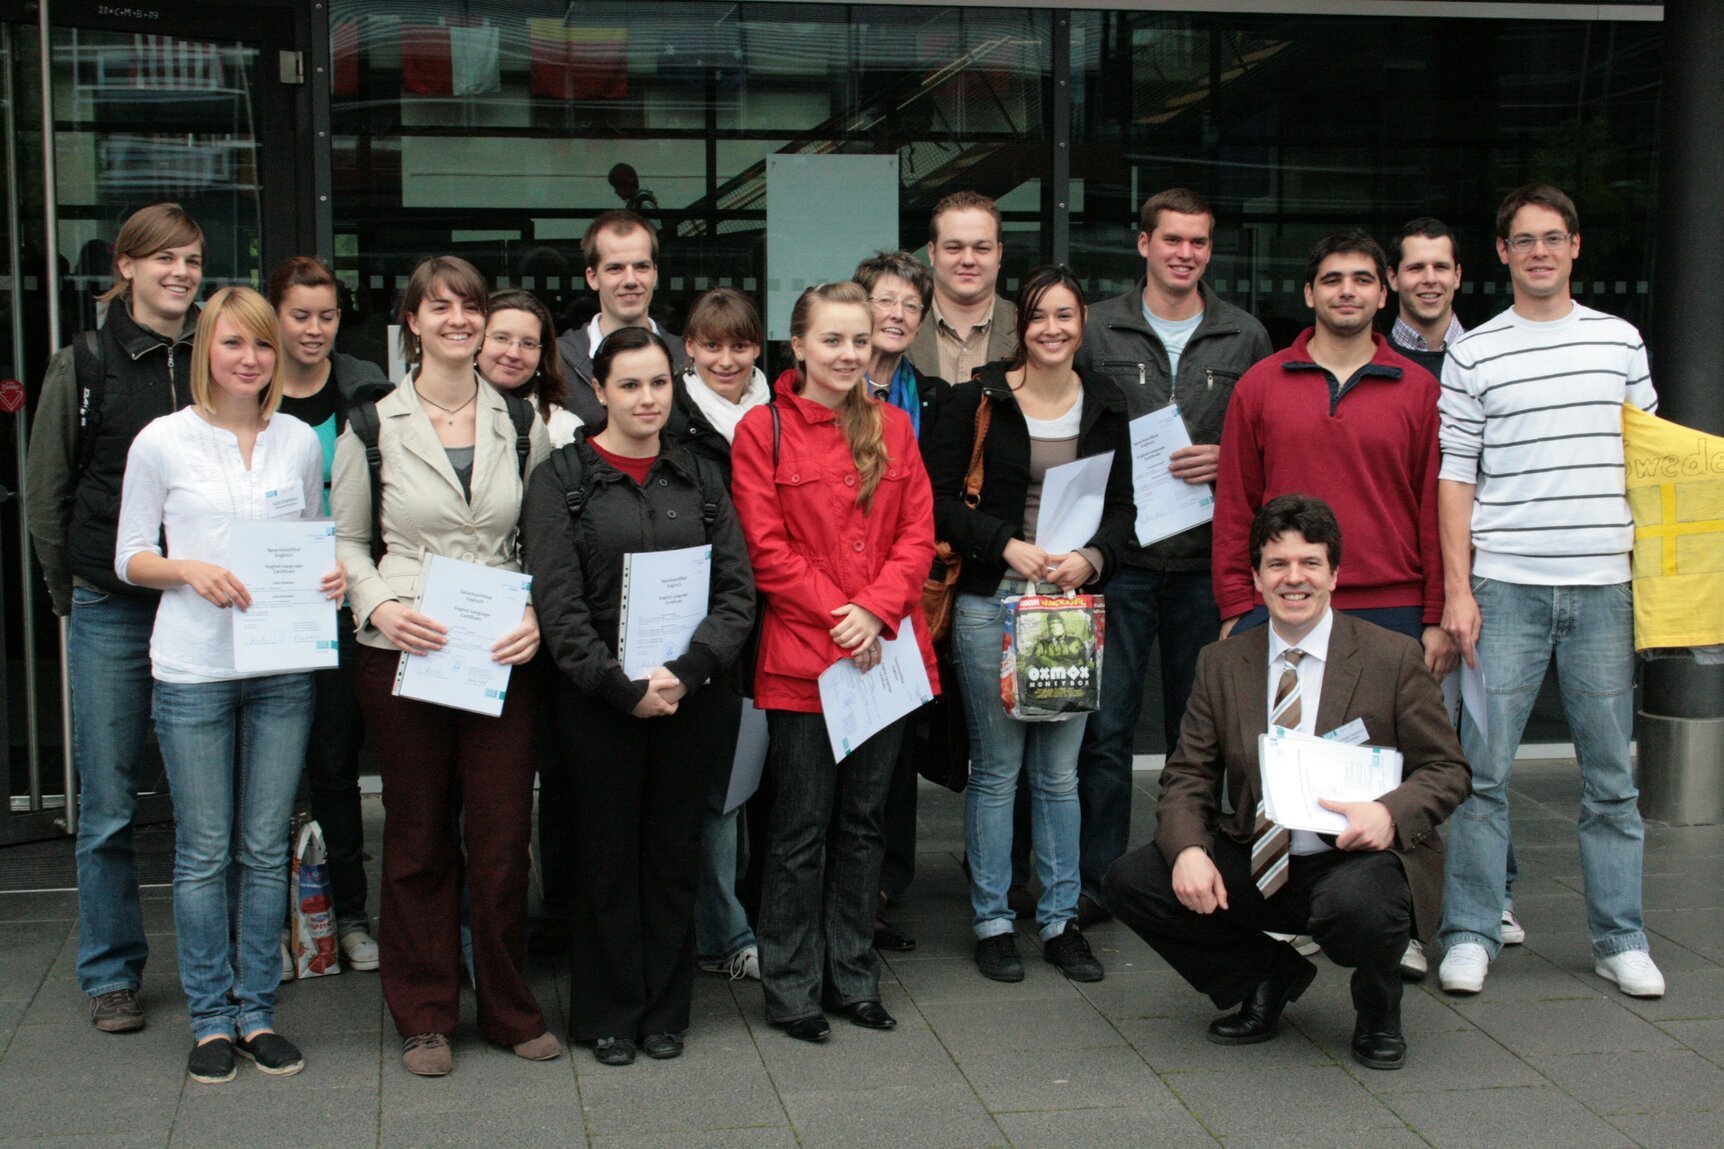 Group photograph after the awards ceremony